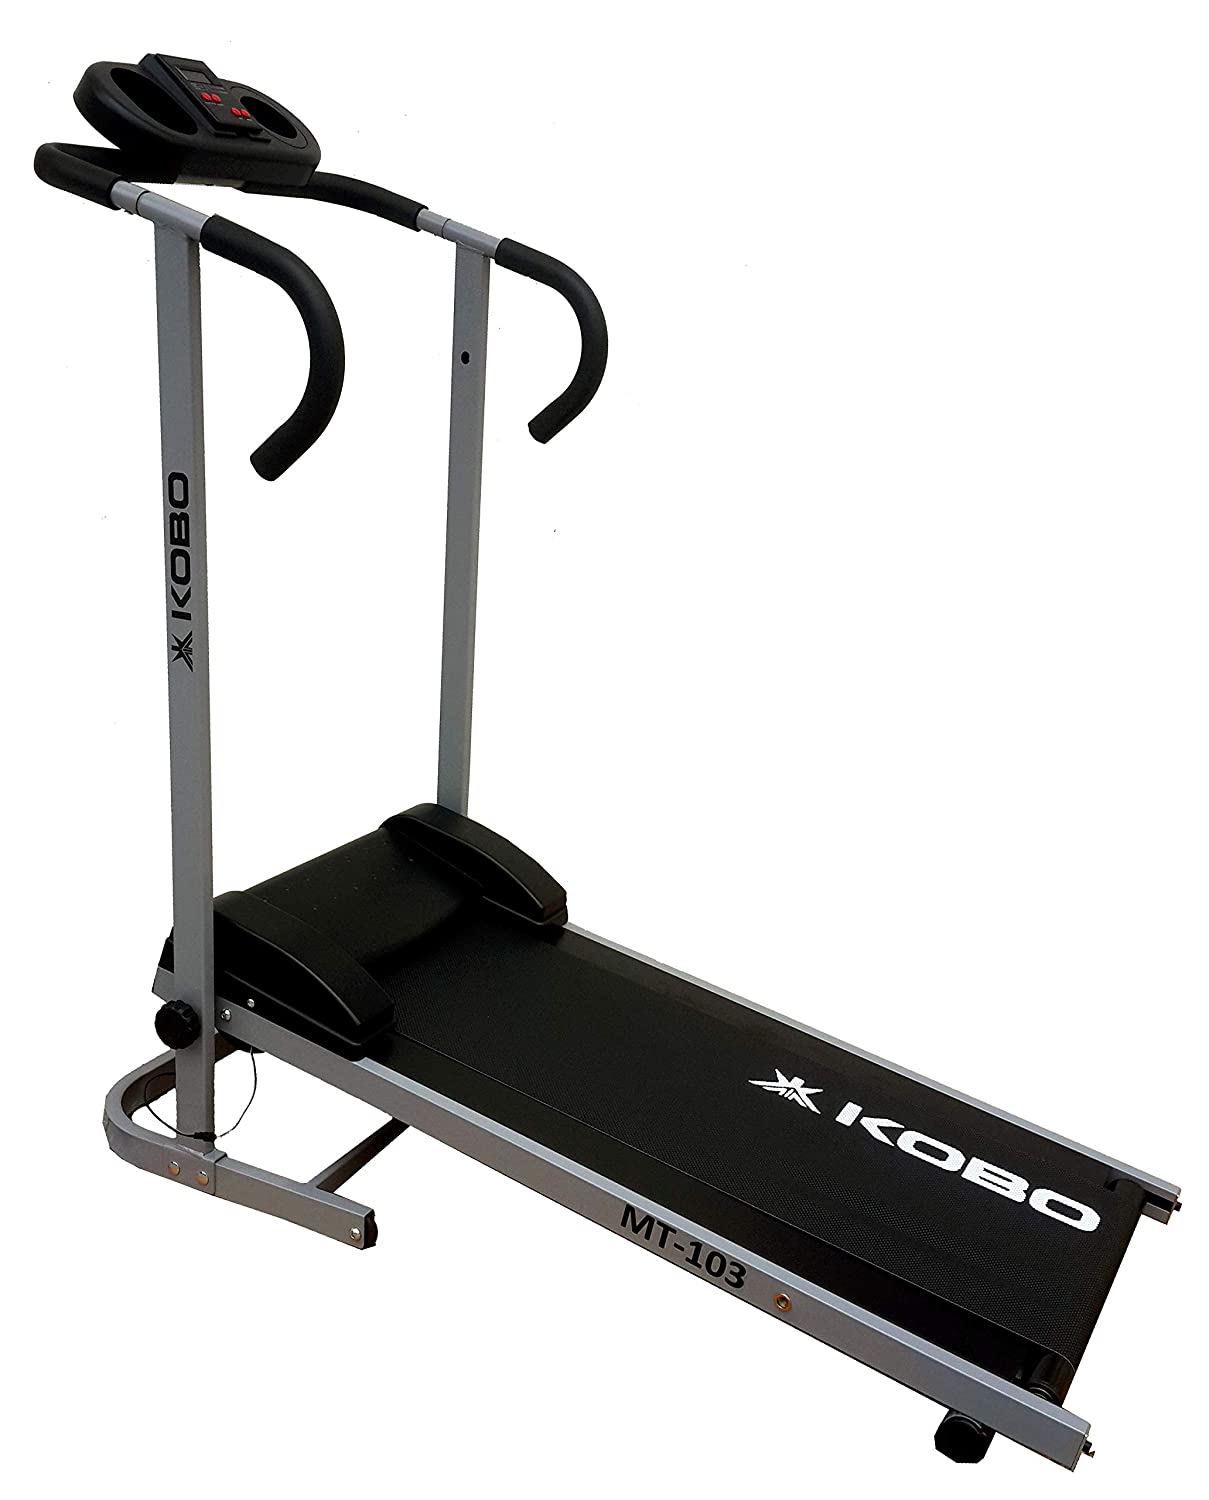 Kobo manual treadmill is the most affordable manual treadmill in India